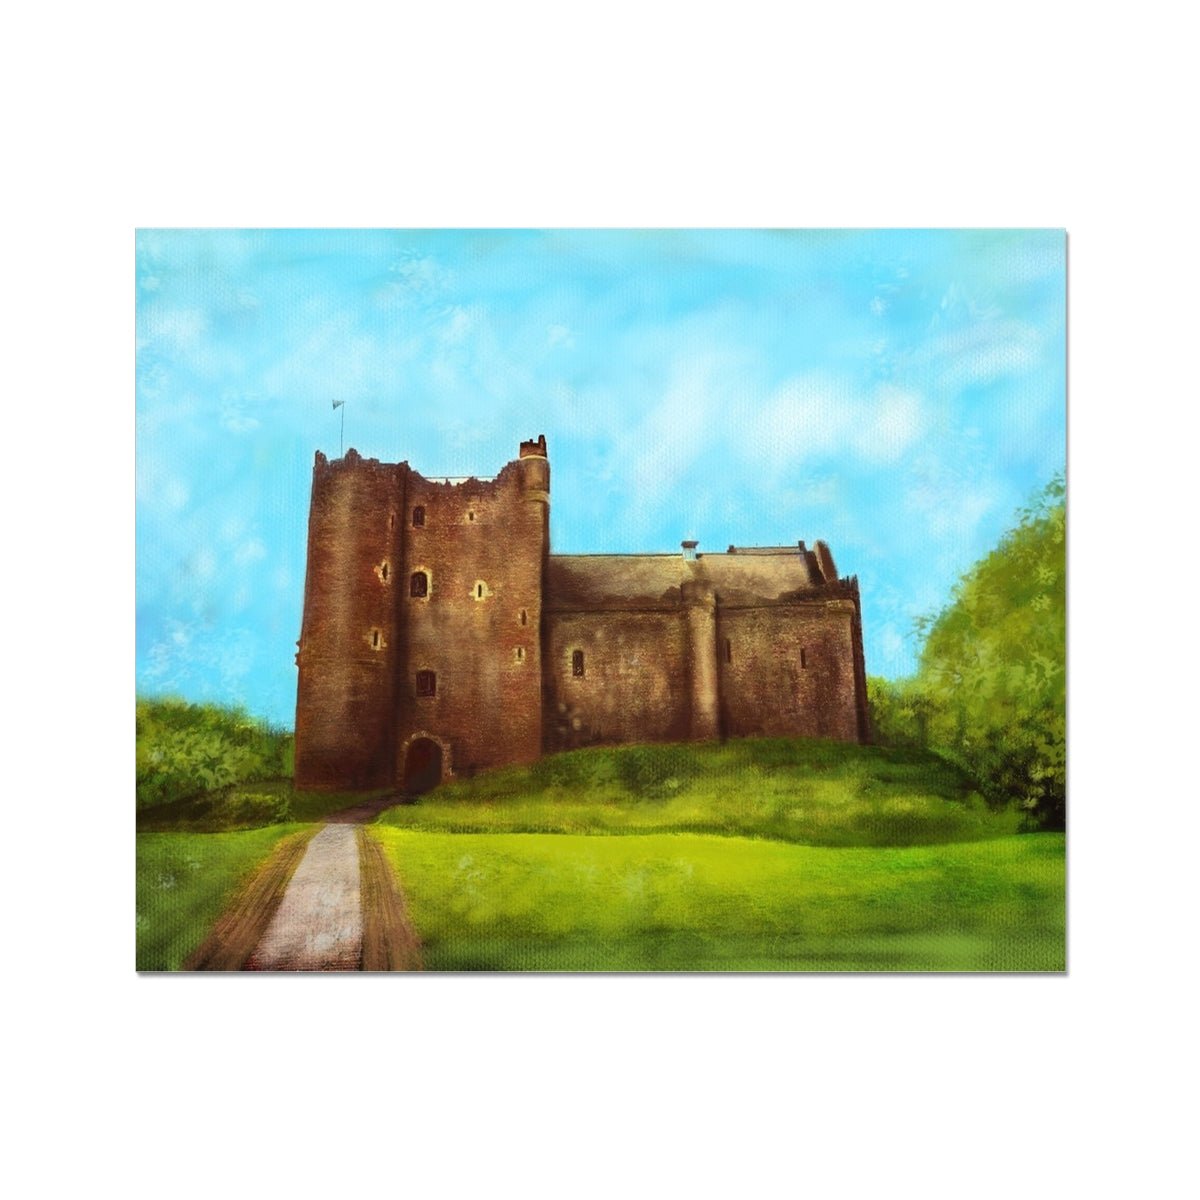 Doune Castle Painting | Artist Proof Collector Prints From Scotland-Artist Proof Collector Prints-Historic & Iconic Scotland Art Gallery-20"x16"-Paintings, Prints, Homeware, Art Gifts From Scotland By Scottish Artist Kevin Hunter